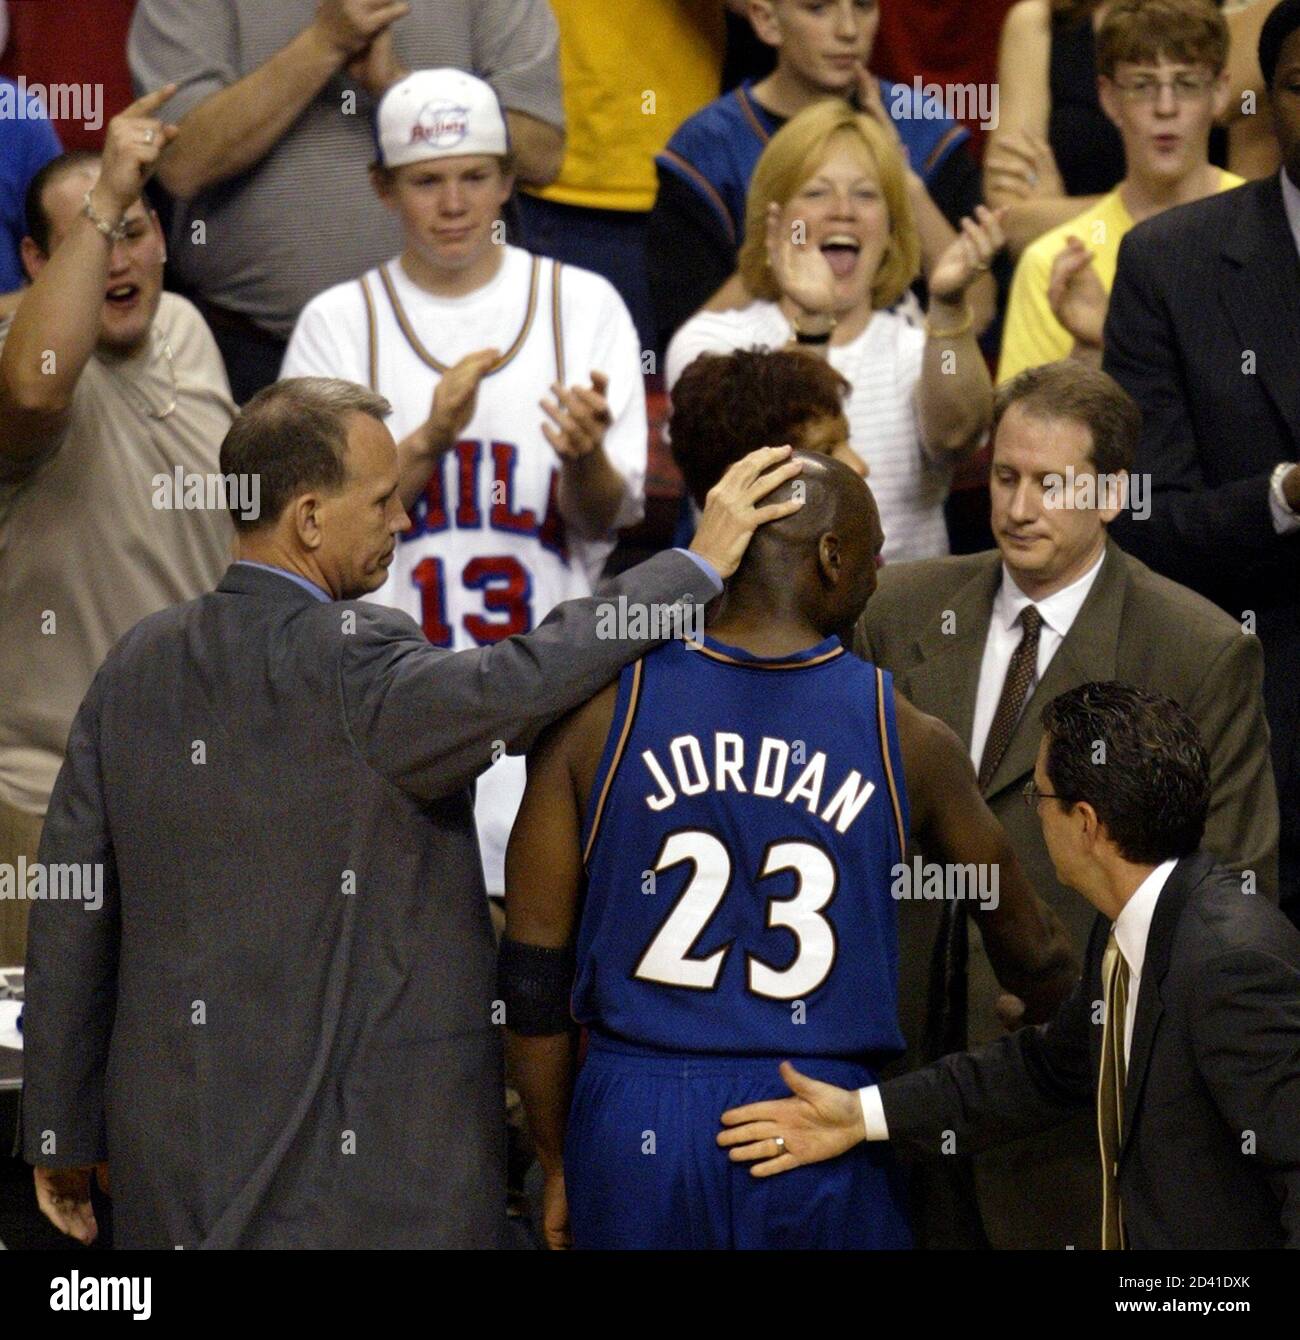 Washington Wizards' Michael Jordan gets a pat on the head from coach Doug Collins as he comes out of the game after scoring the final point of his career on a foul shot with one minute and 45 seconds left in the game against the Philadelphia 76ers, in Philadelphia April 16, 2003. REUTERS/Ray Stubblebine  GMH/HB Stock Photo